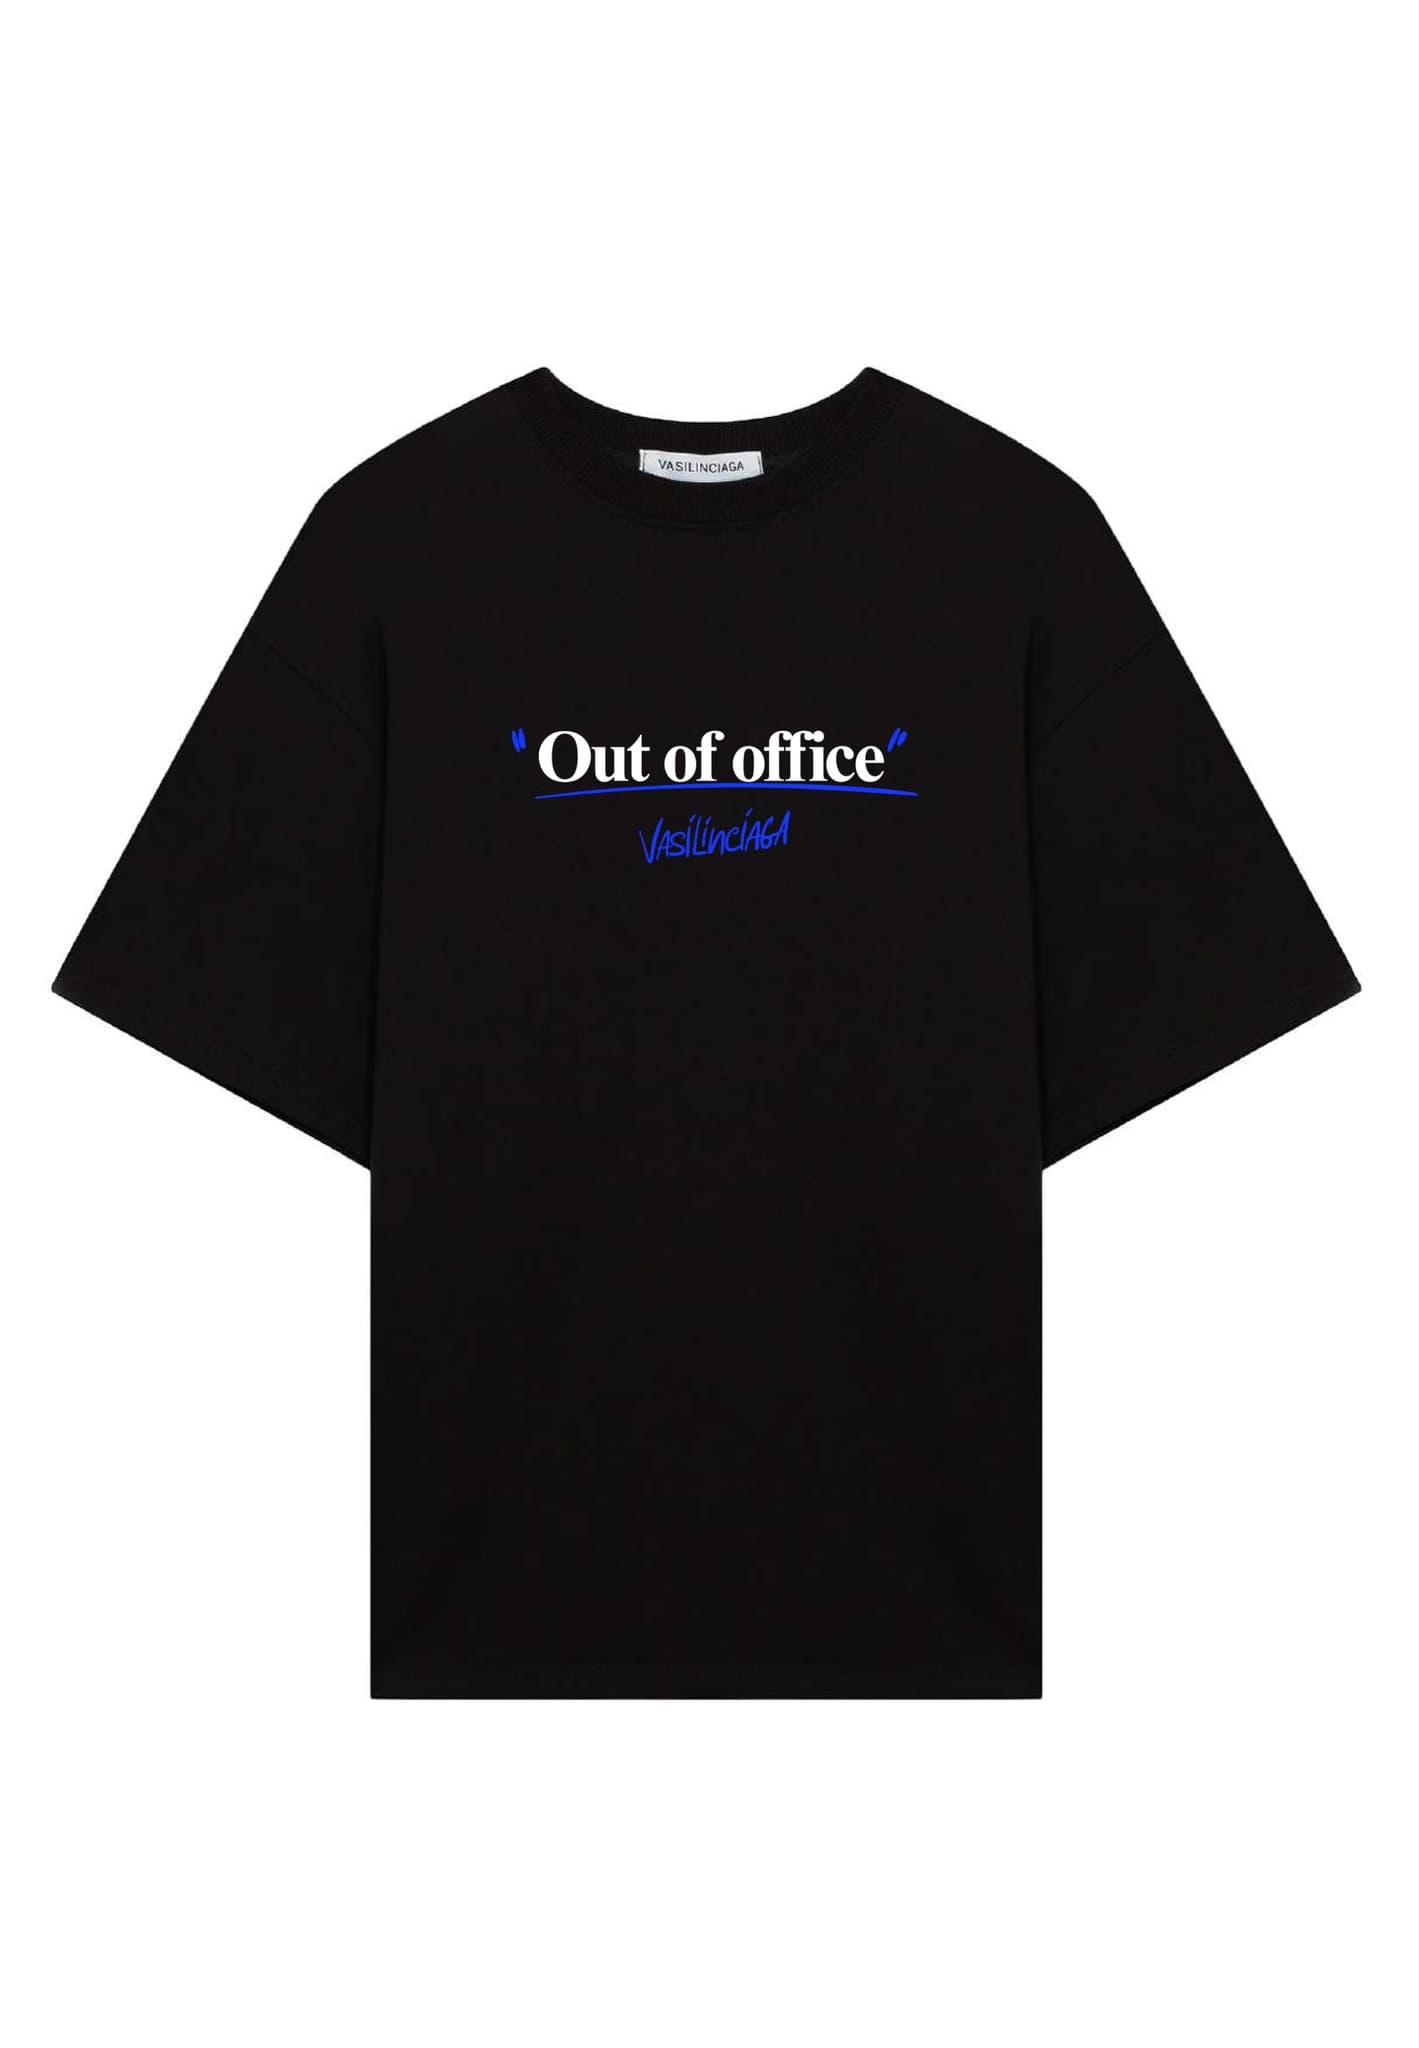 Футболка "Out of office"